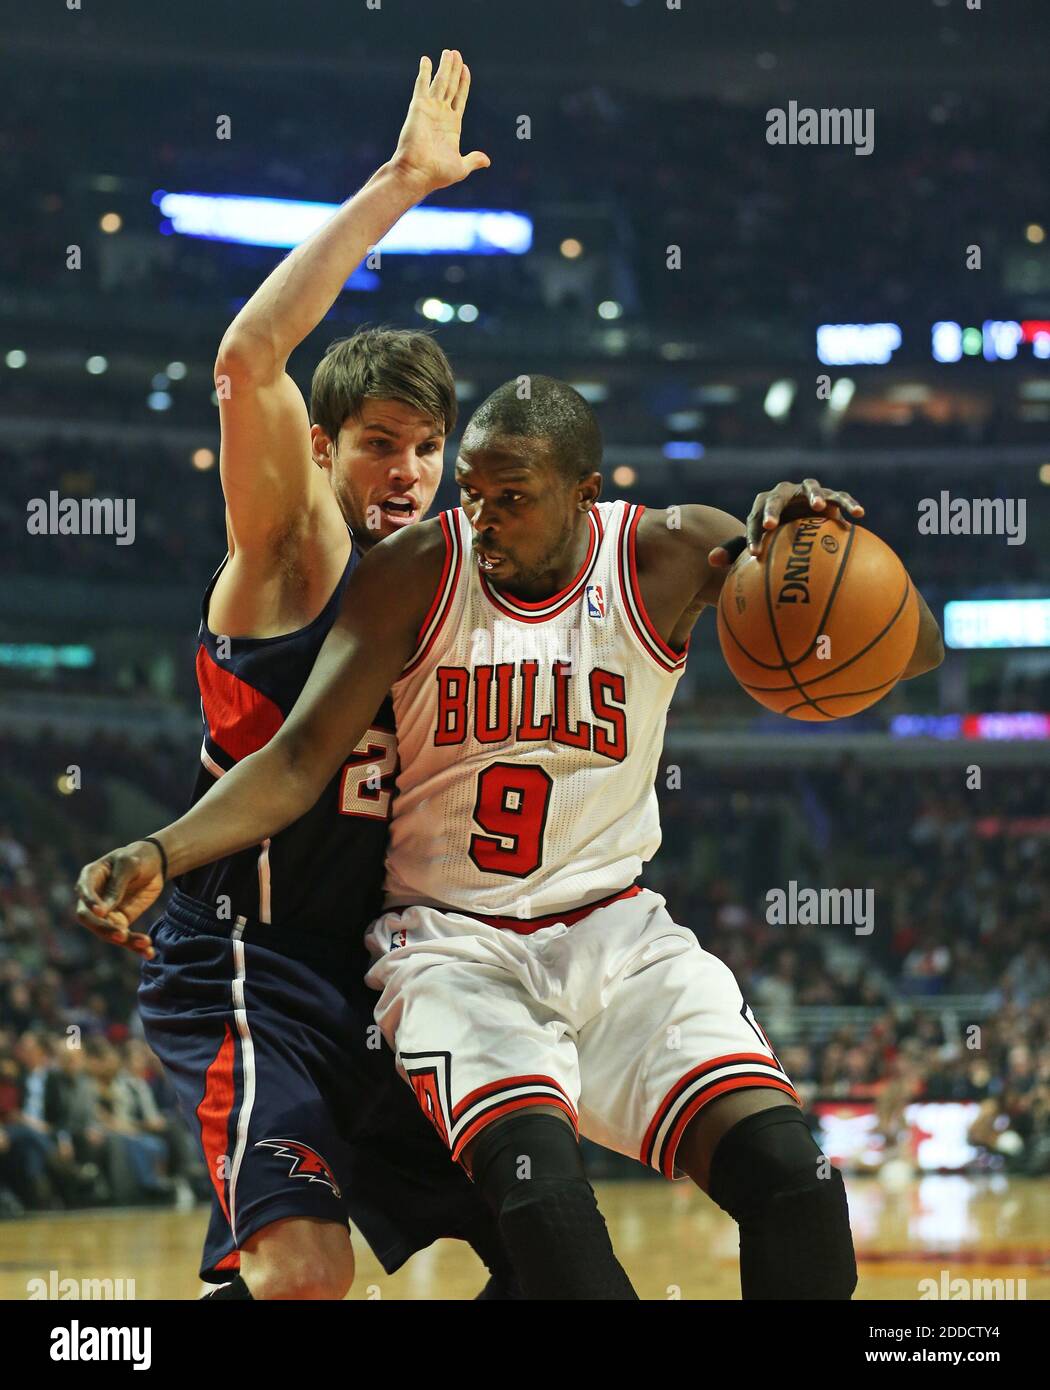 NO FILM, NO VIDEO, NO TV, NO DOCUMENTARY - Chicago Bulls small forward Luol Deng (9) controls the ball against Atlanta Hawks shooting guard Kyle Korver (26) during the first half of their game at the United Center in Chicago, IL, USA on January 14, 2013. Photo by Nuccio DiNuzzo/Chicago Tribune/MCT/ABACAPRESS.COM Stock Photo